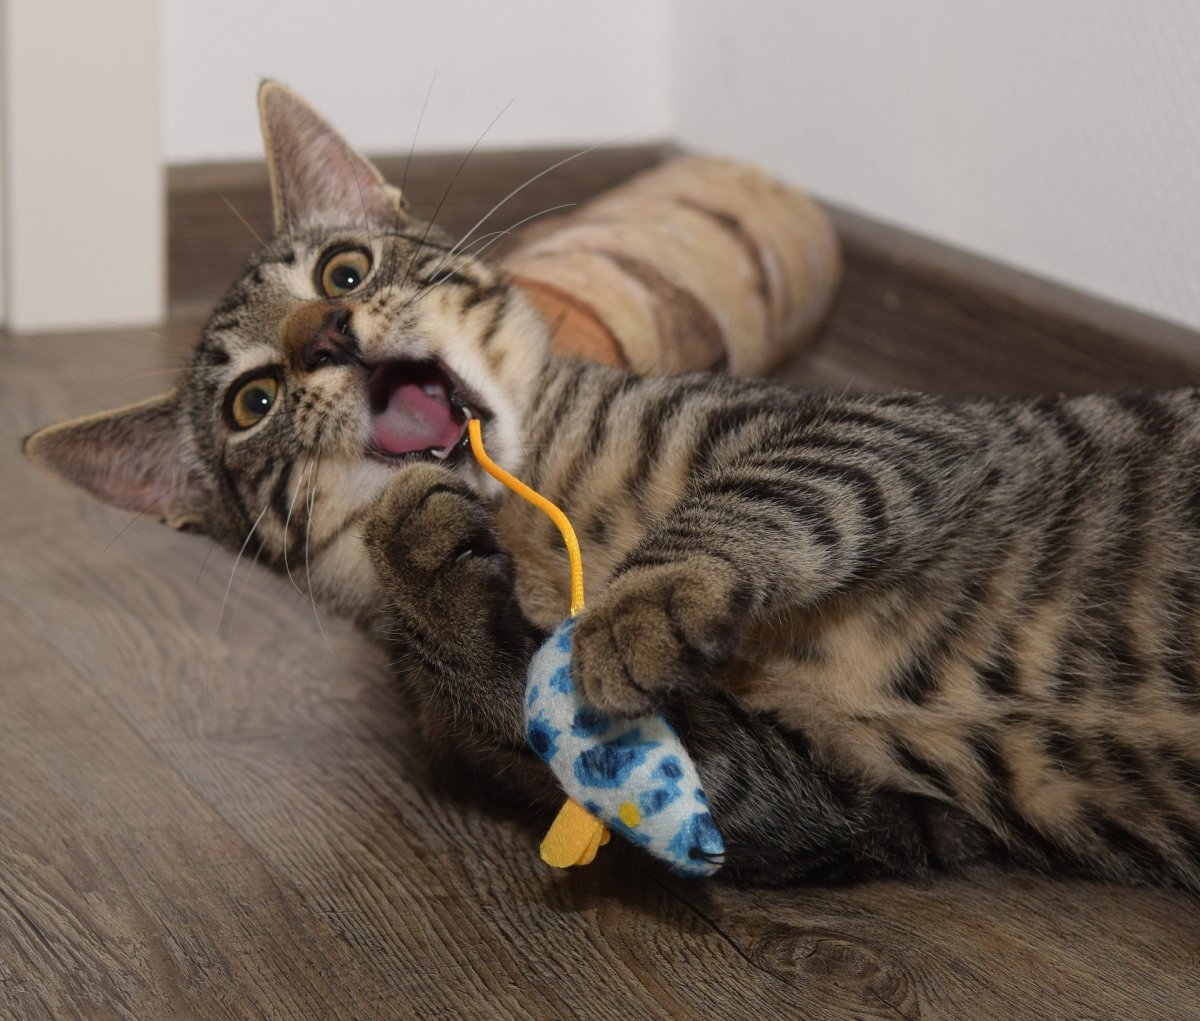 Cats practice their hunting skills by playing.